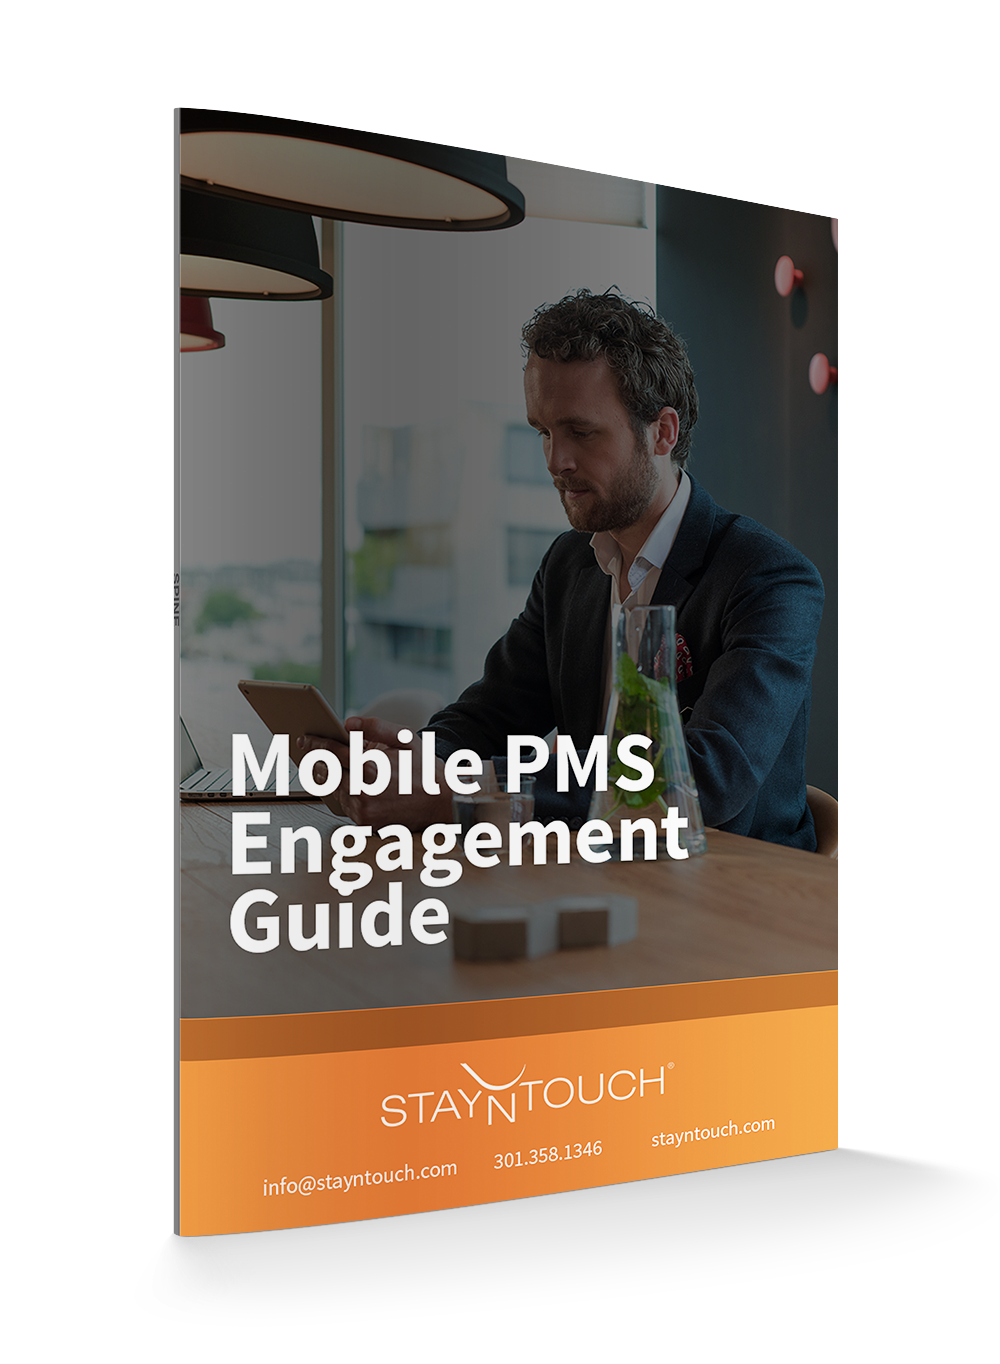 Mobile PMS Engagement Guide - Stayntouch